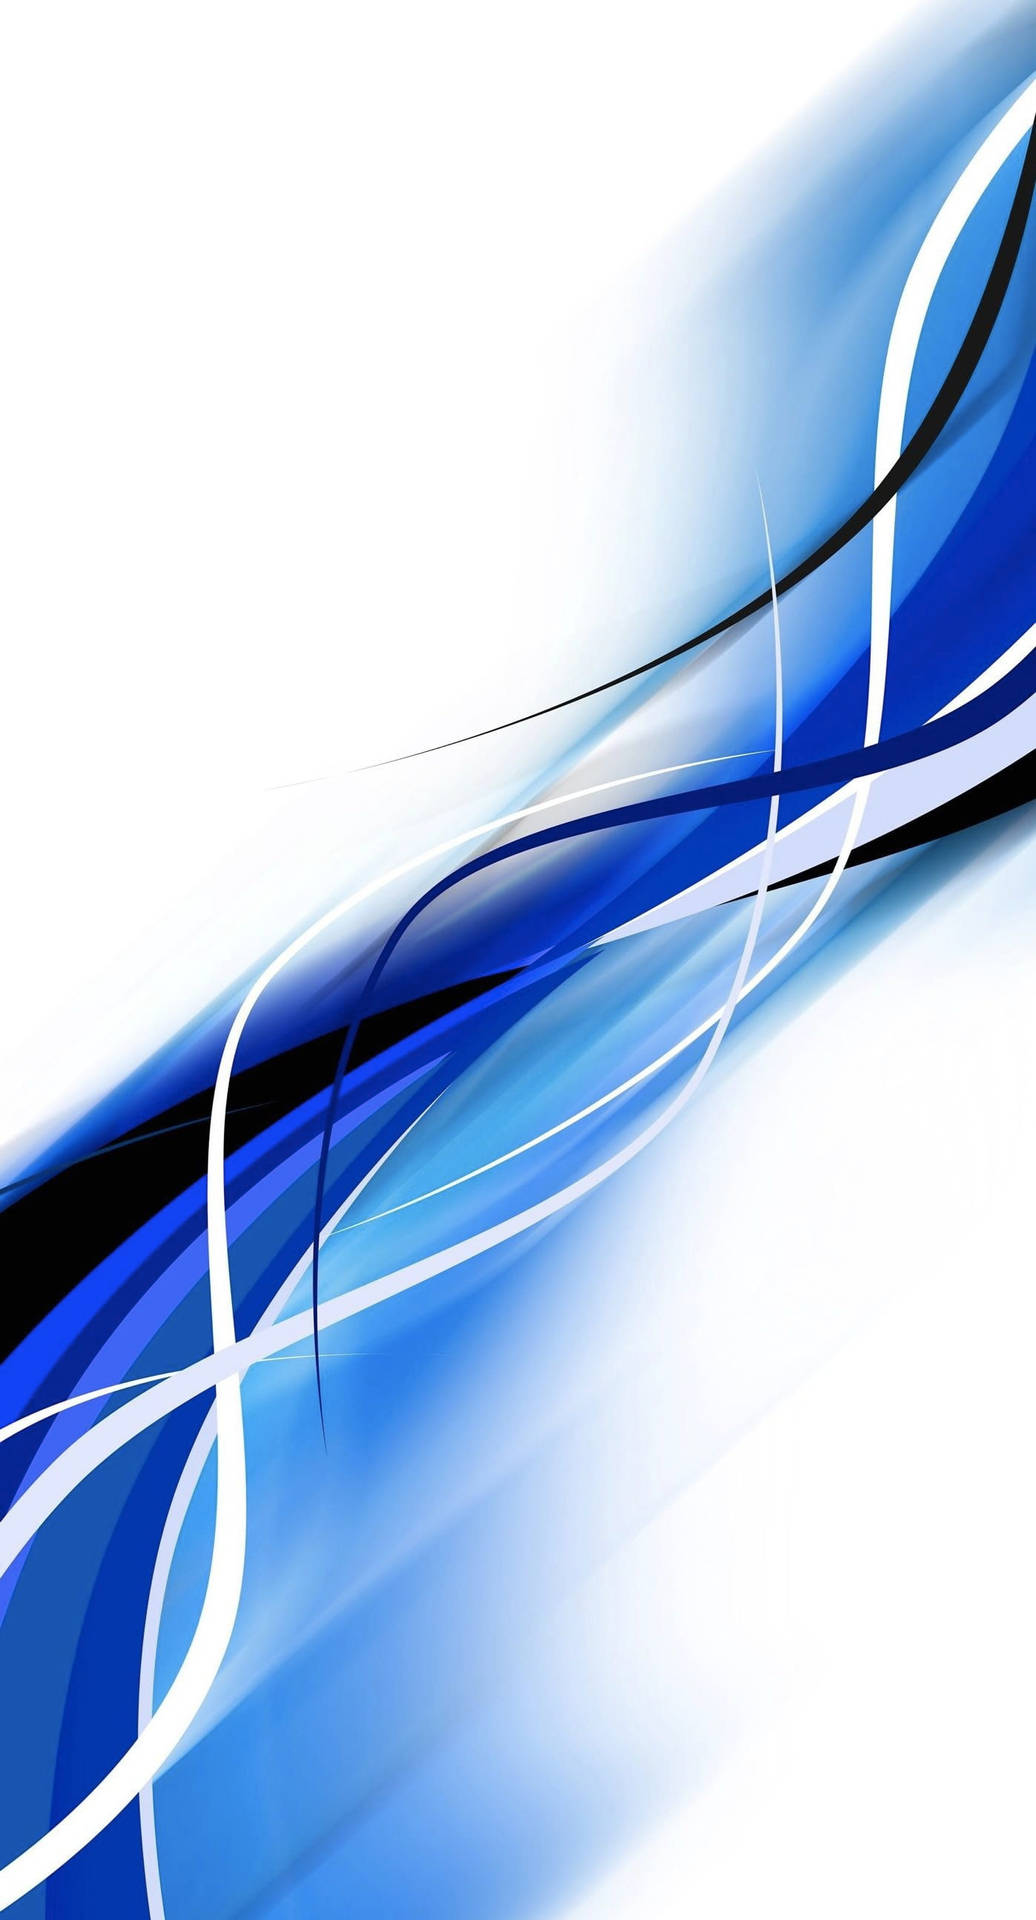 Blue Curving Through Cool White Background